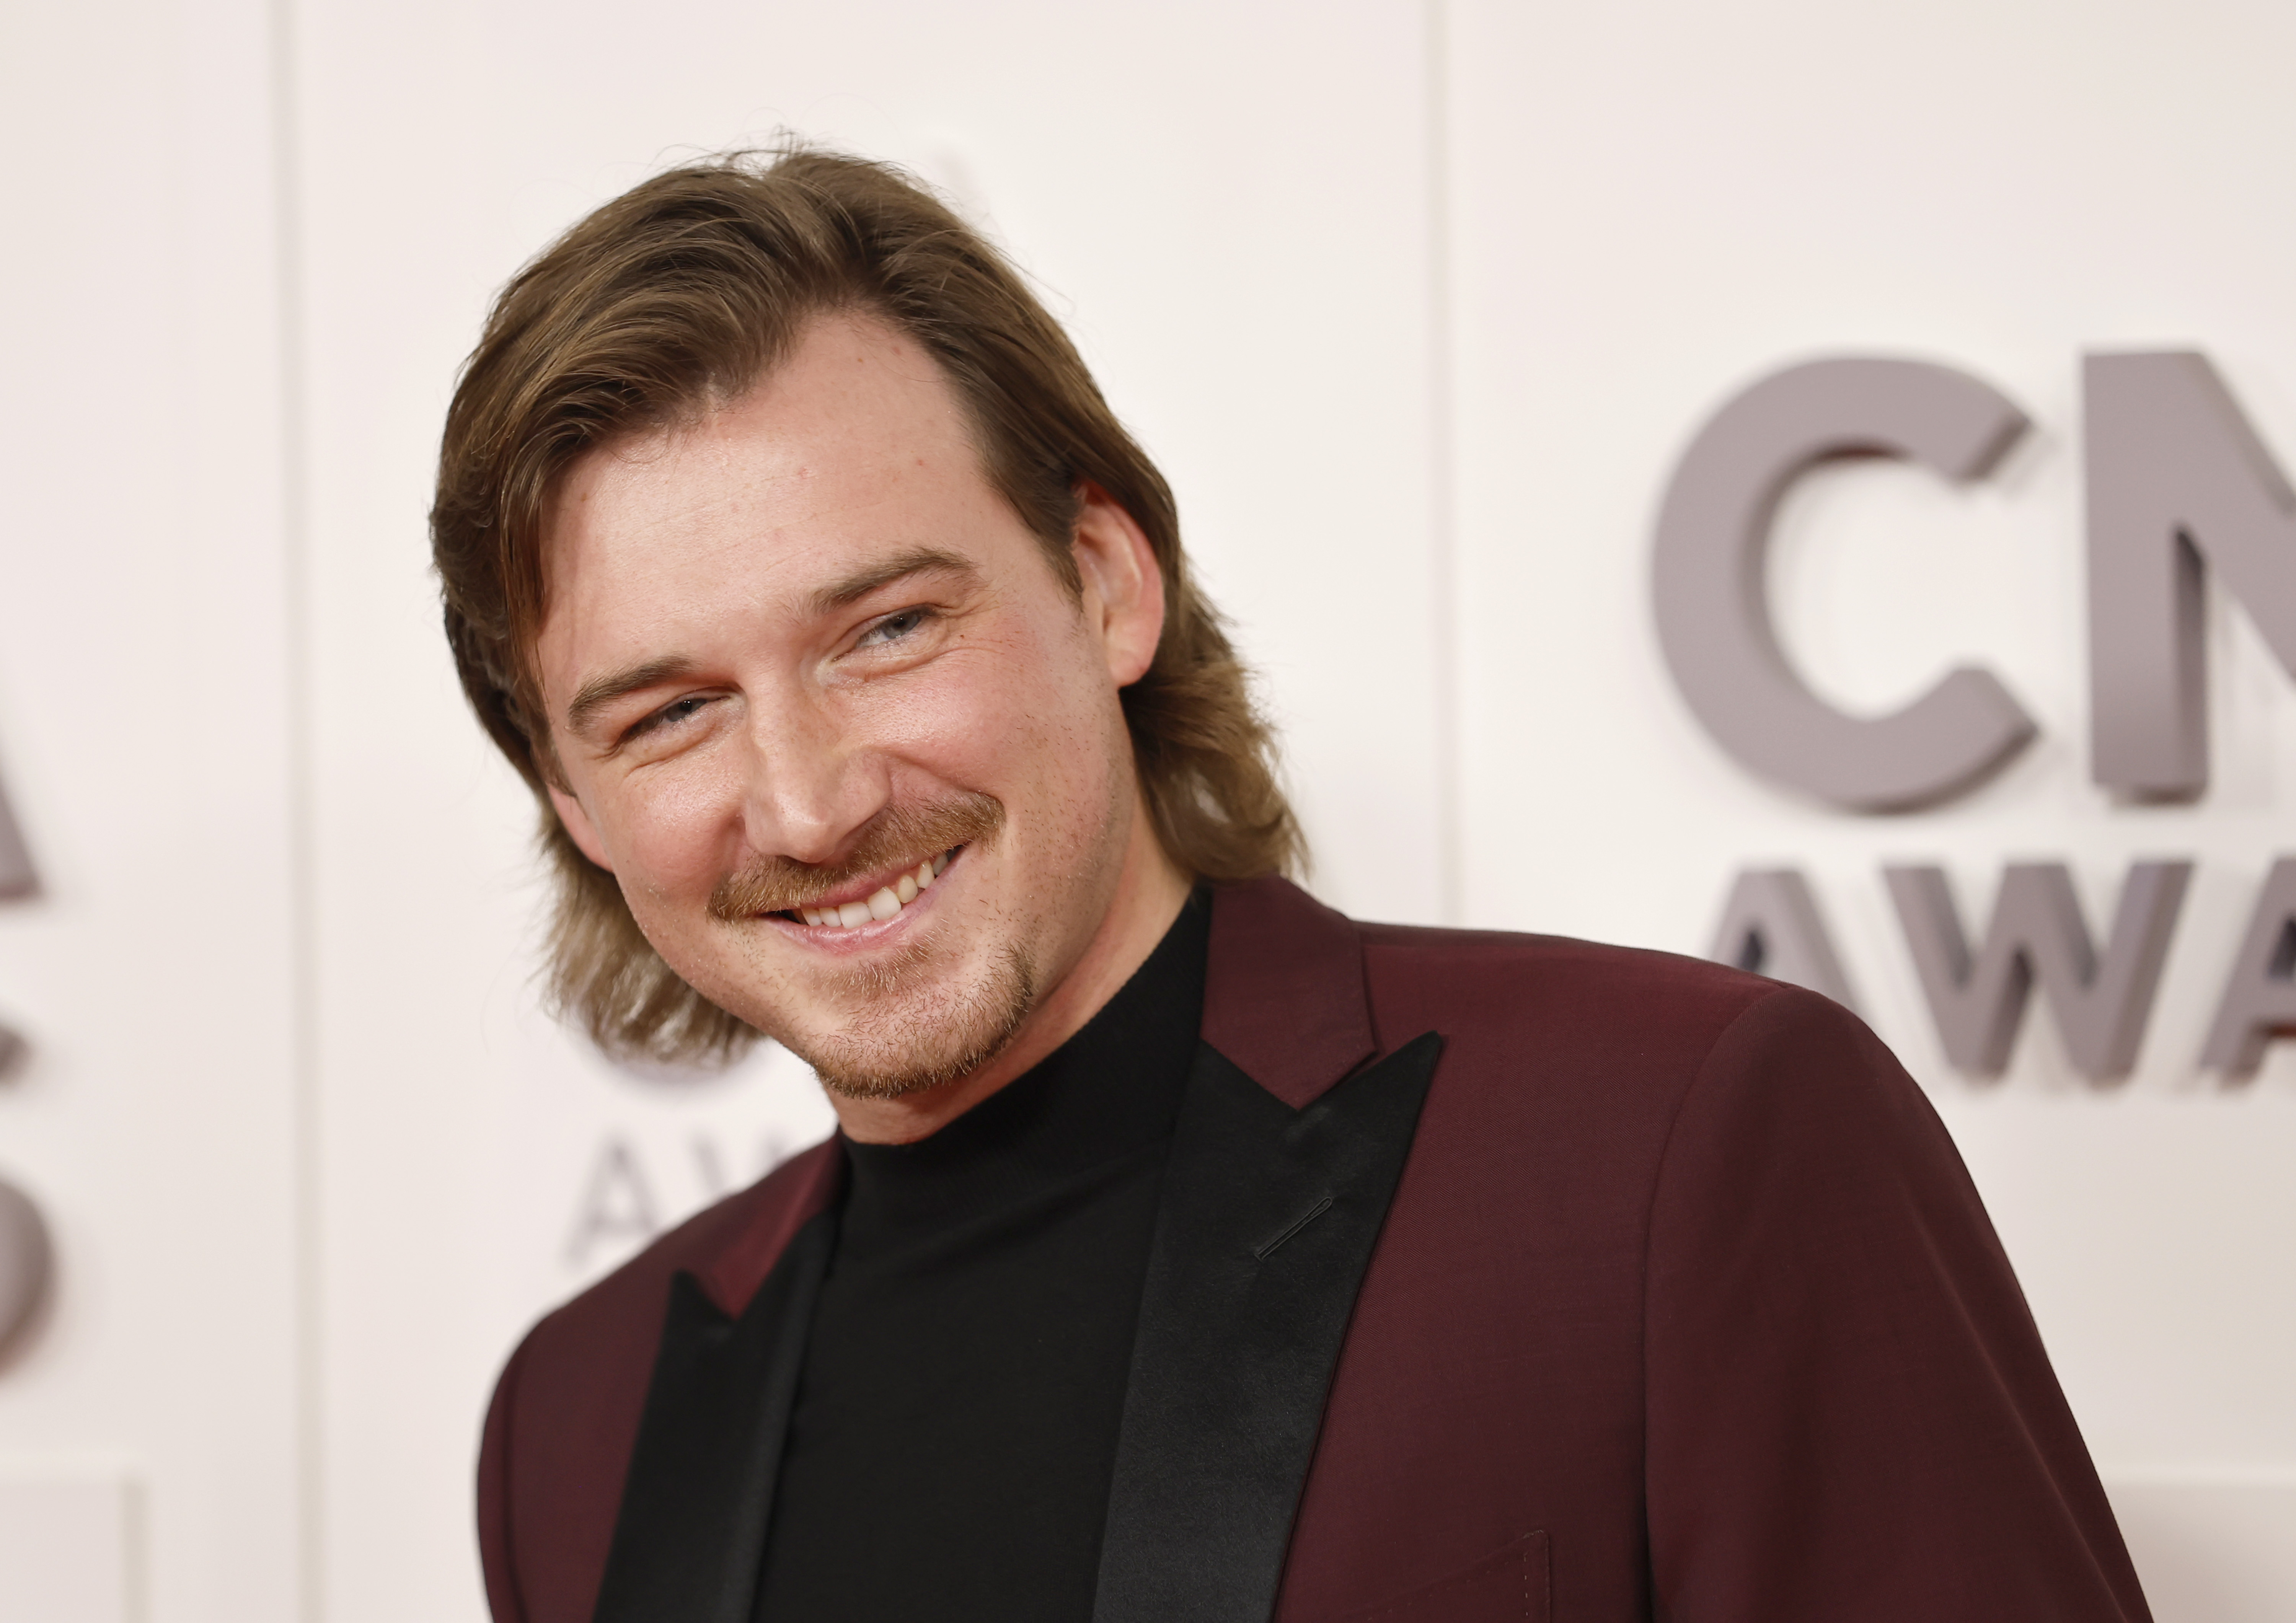 Morgan Wallen at The 56th Annual CMA Awards in November 2022, in Nashville, Tennessee. | Source: Getty Images